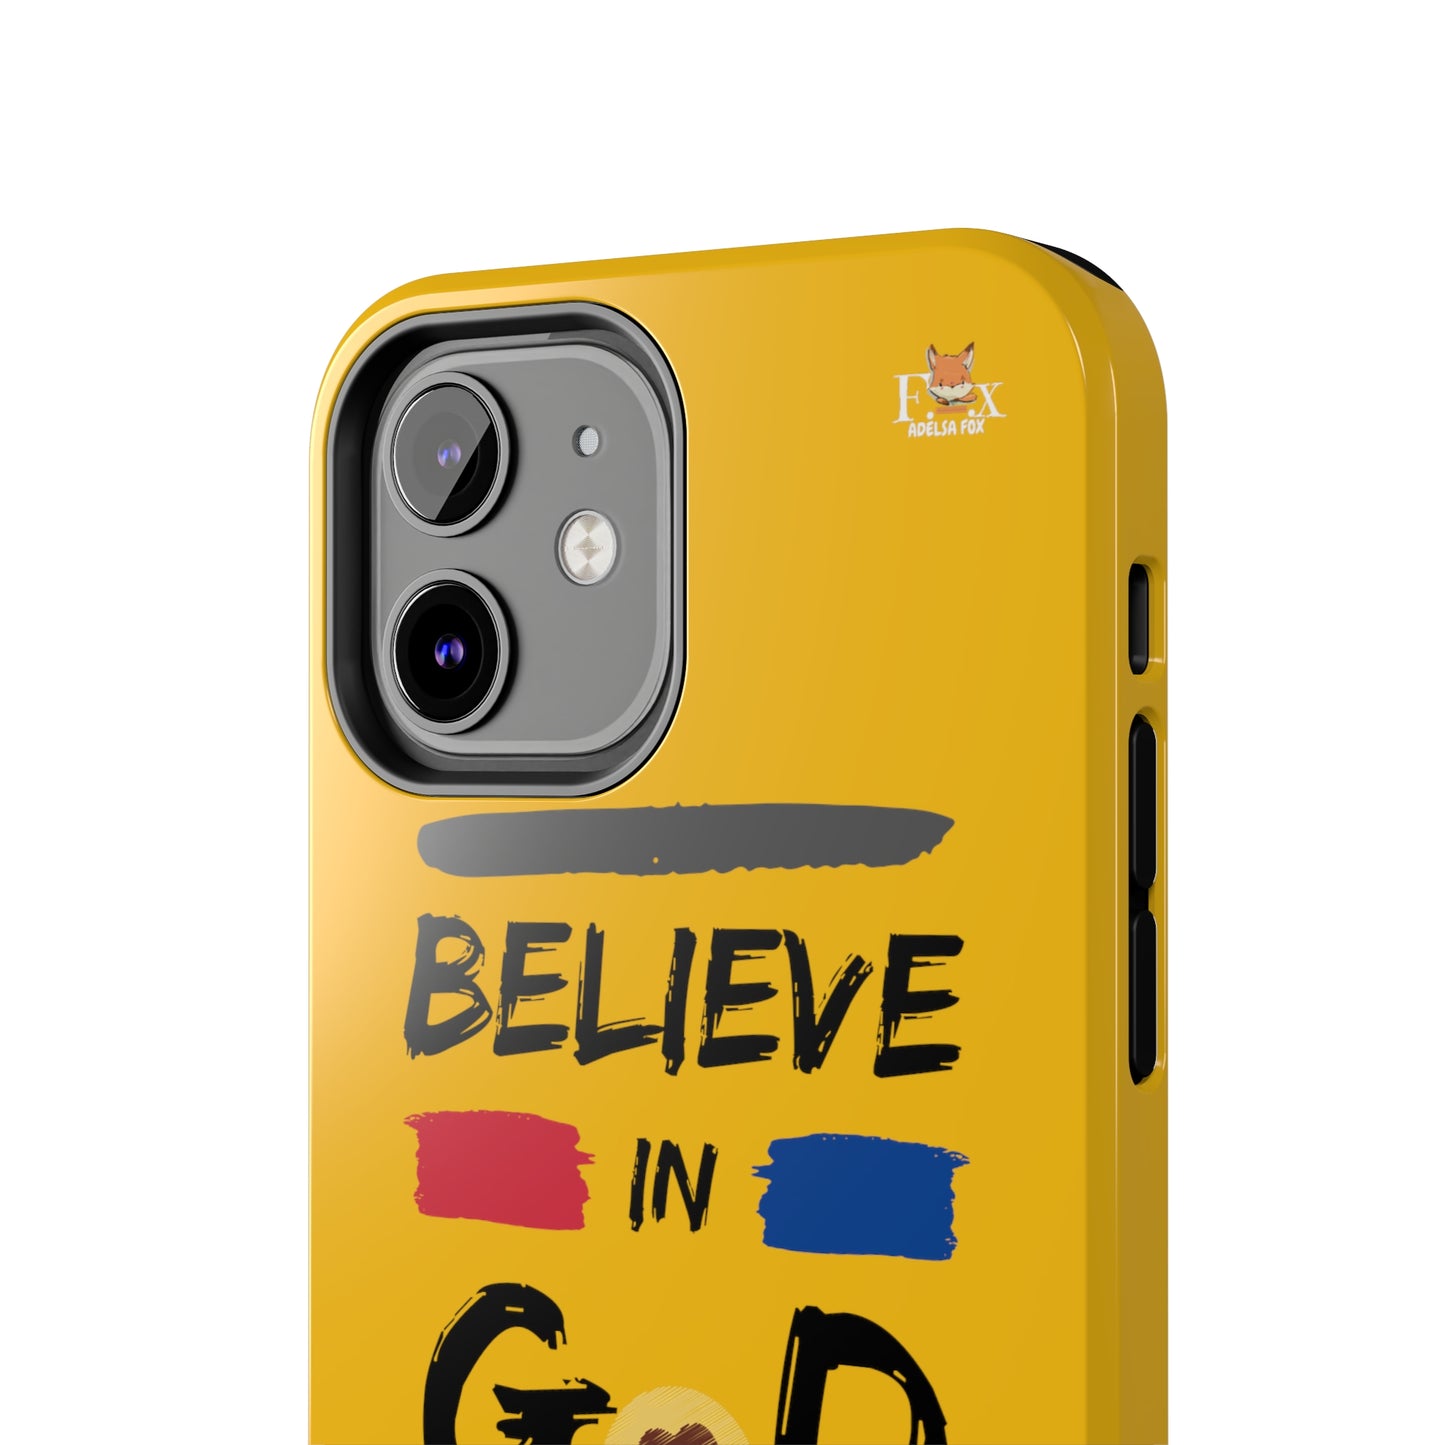 Believe in God- 25 sizes Tough Phone Cases